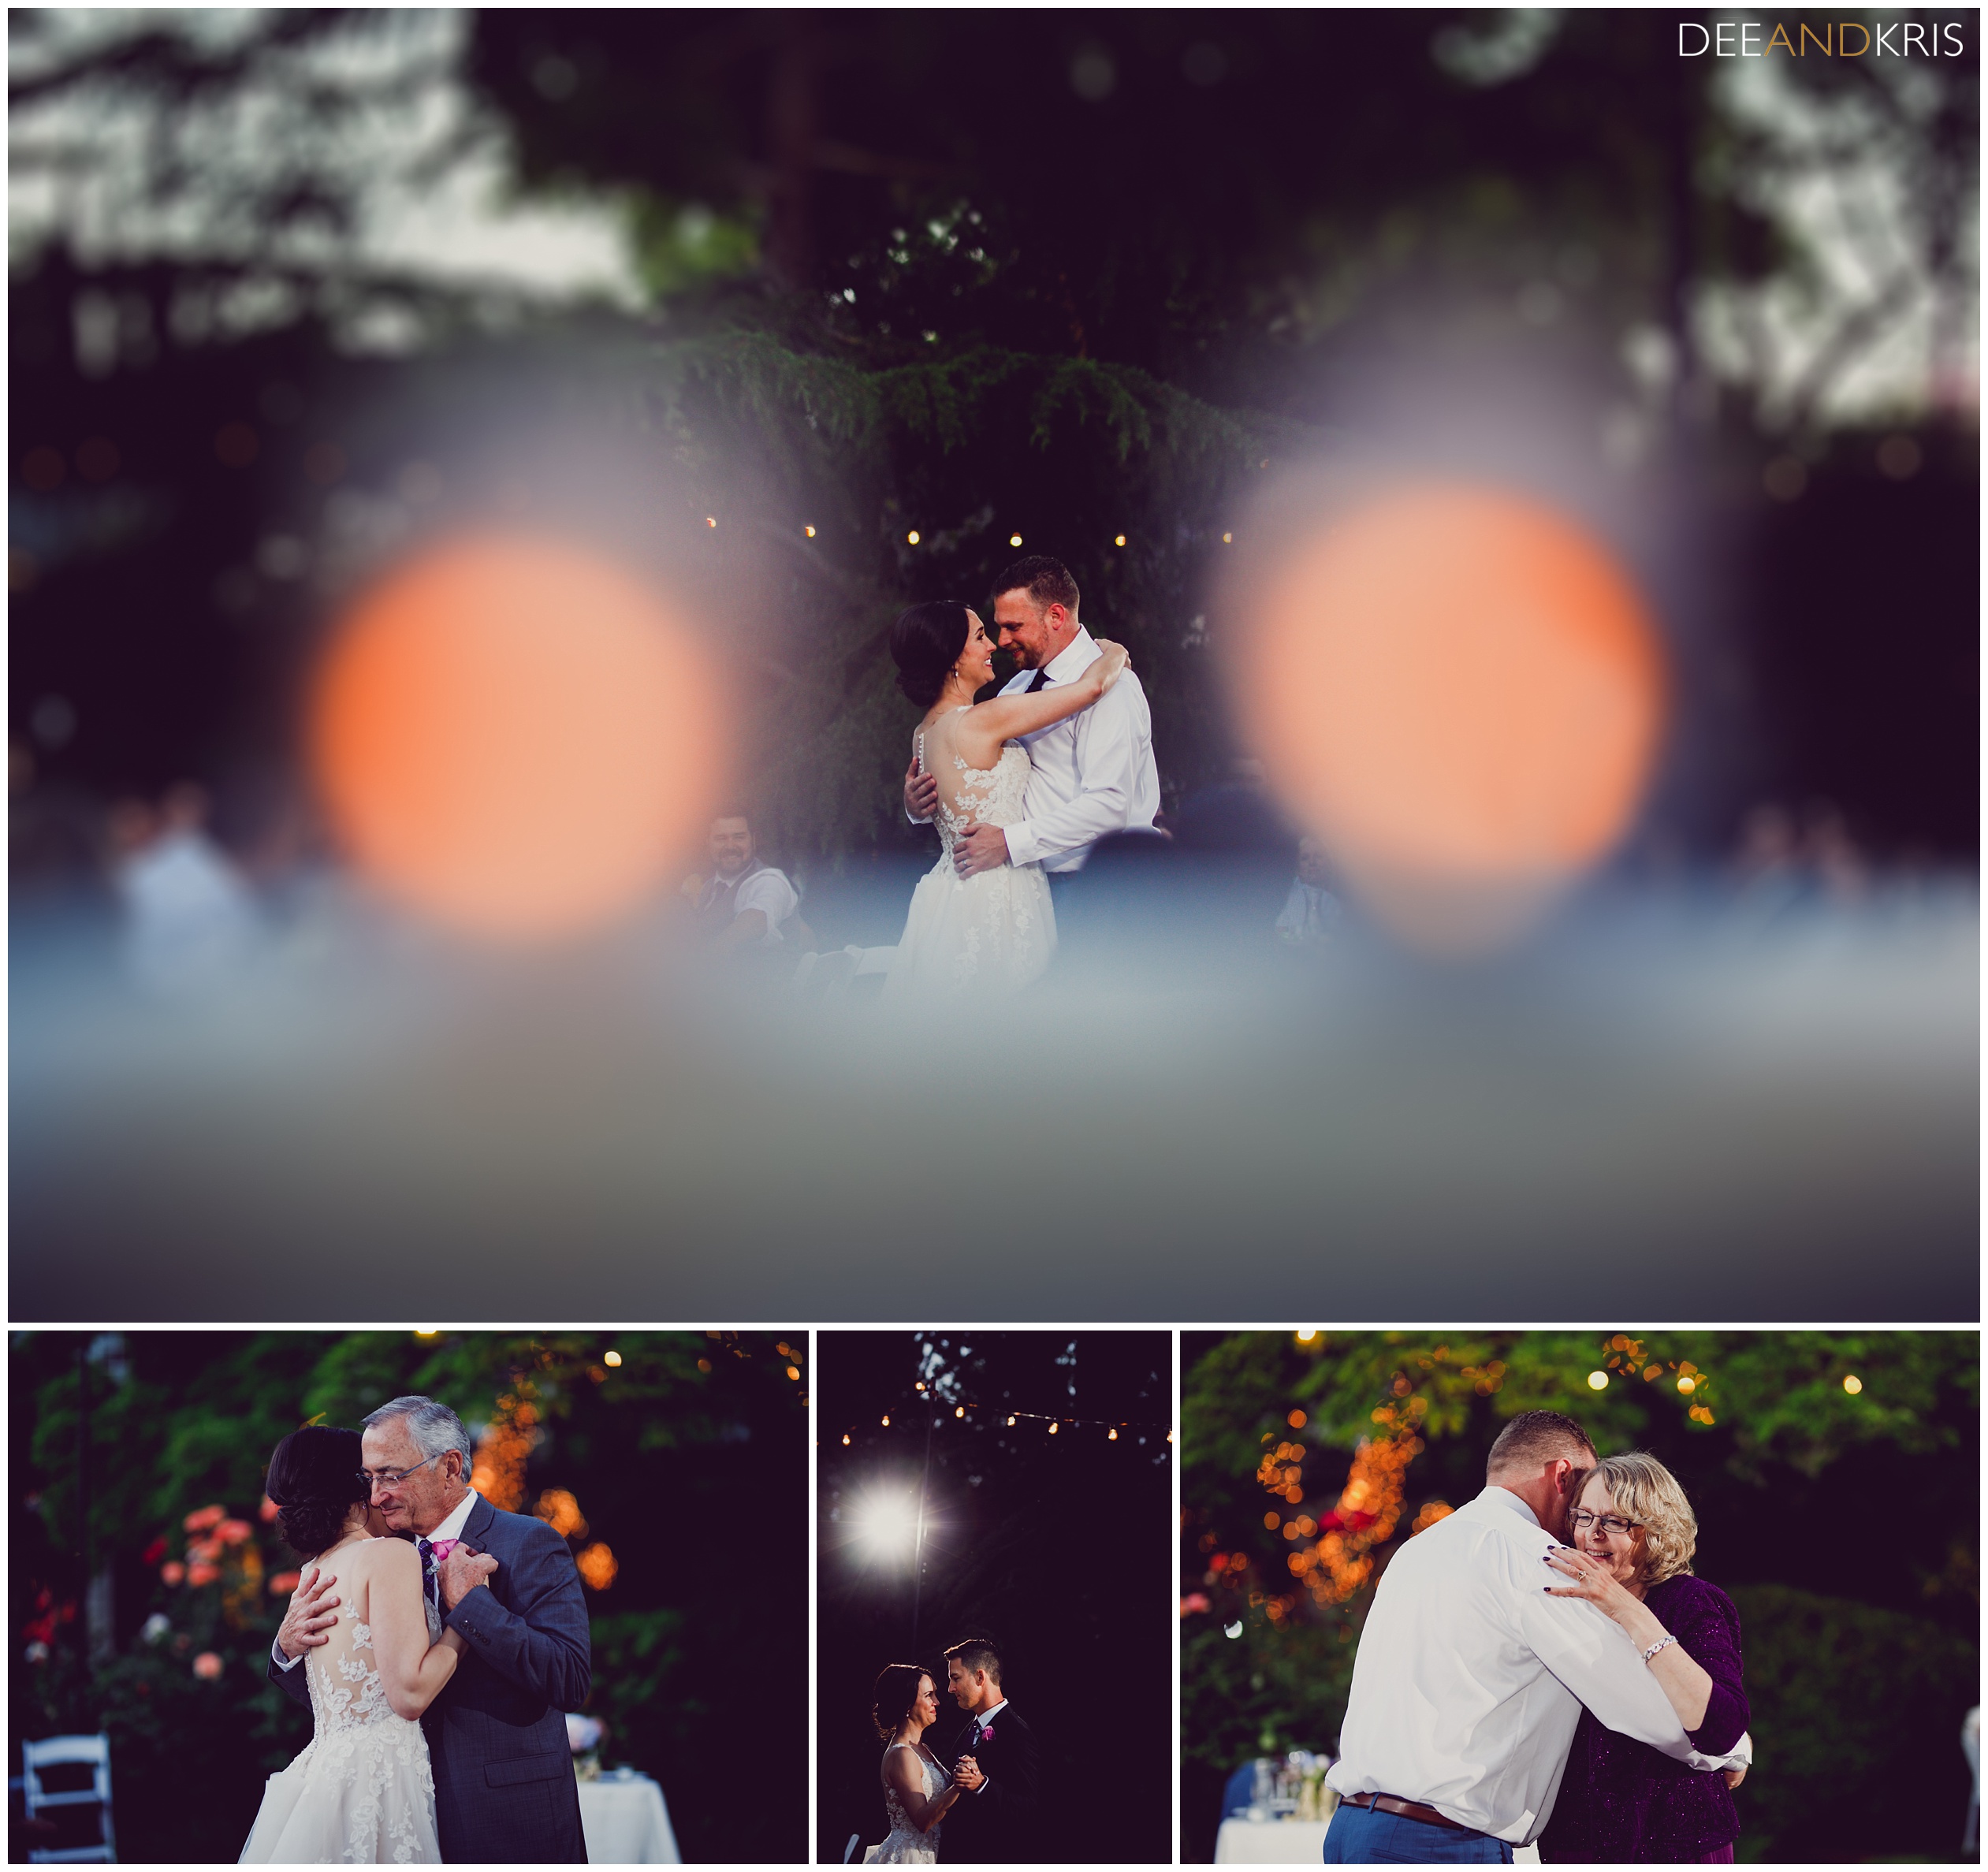 First Dance, Sacramento Wedding, Design with Florae, Heritage Dining & Provisions, Freeport Bakery, Mr DJ Event Services,  Fab Forties Wedding, detail shot, Heritage Dining & Provisions, Sacramento Wedding photographers, Dee and Kris Photography, Bride and Bridemaids 